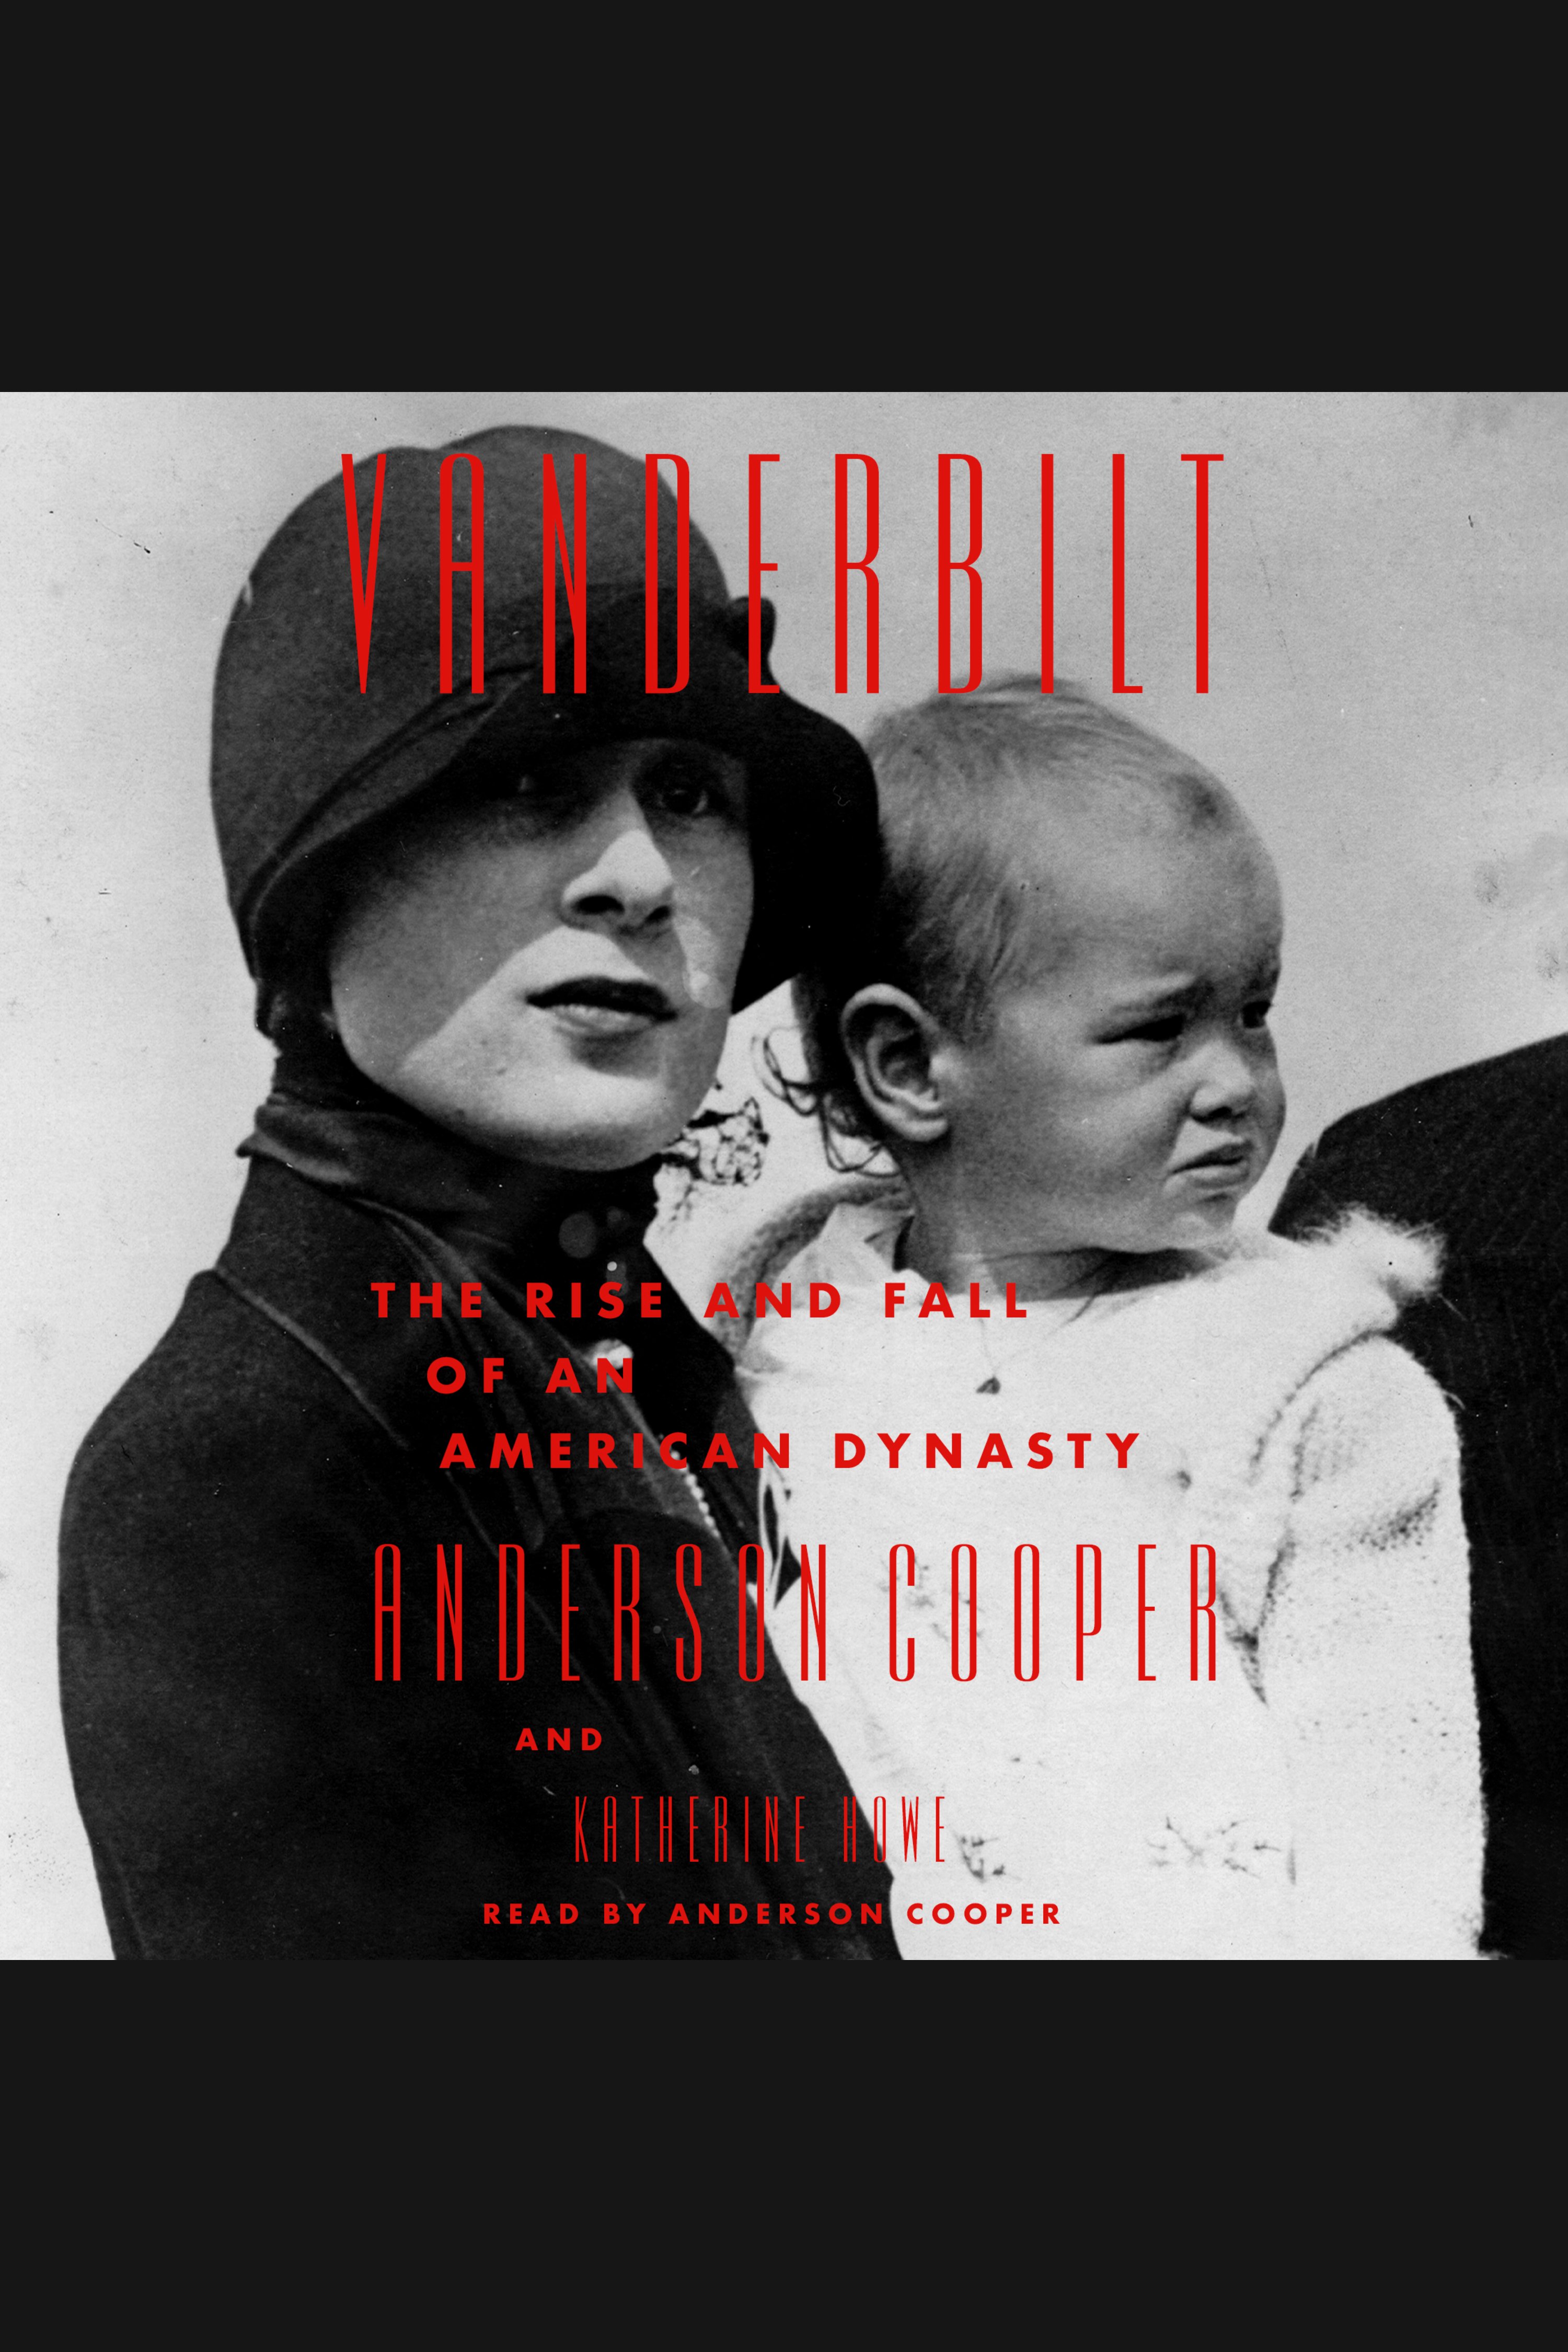 Vanderbilt The Rise and Fall of an American Dynasty cover image